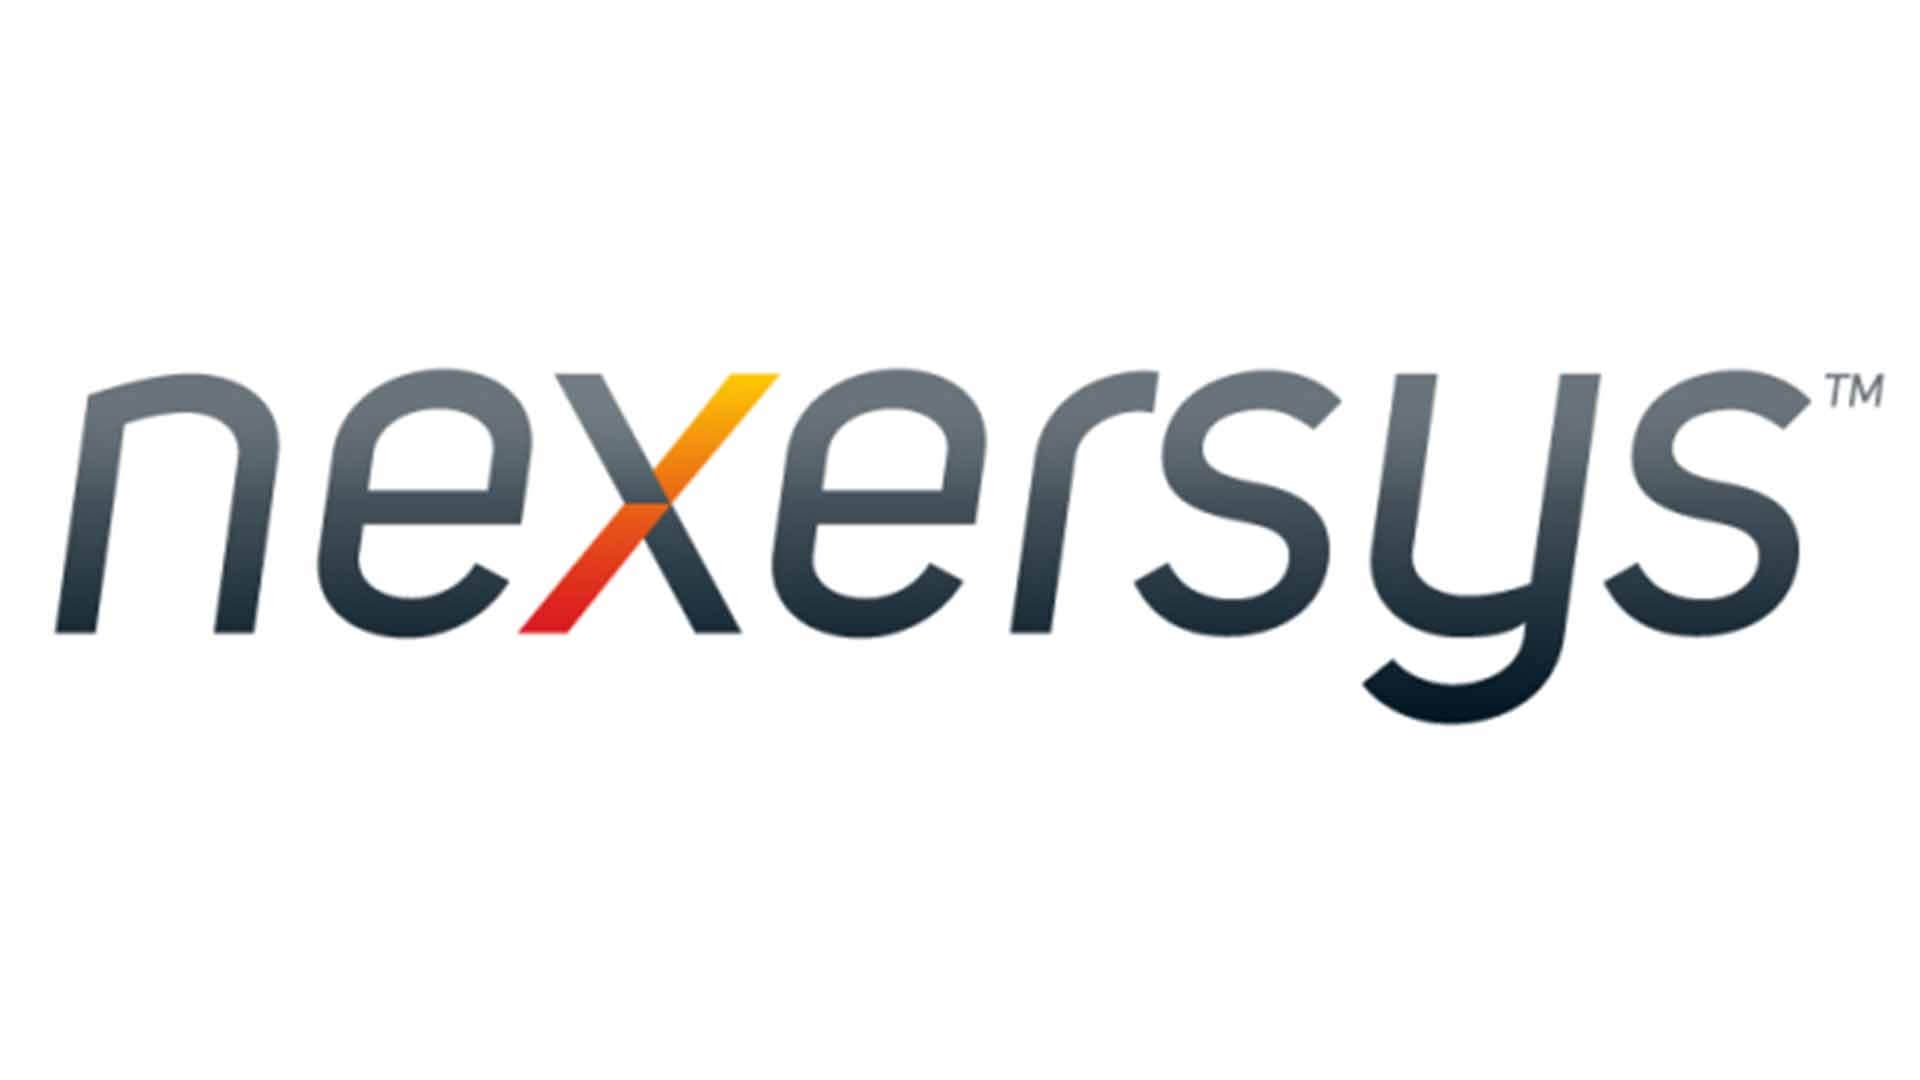 A logo of exergy is shown.